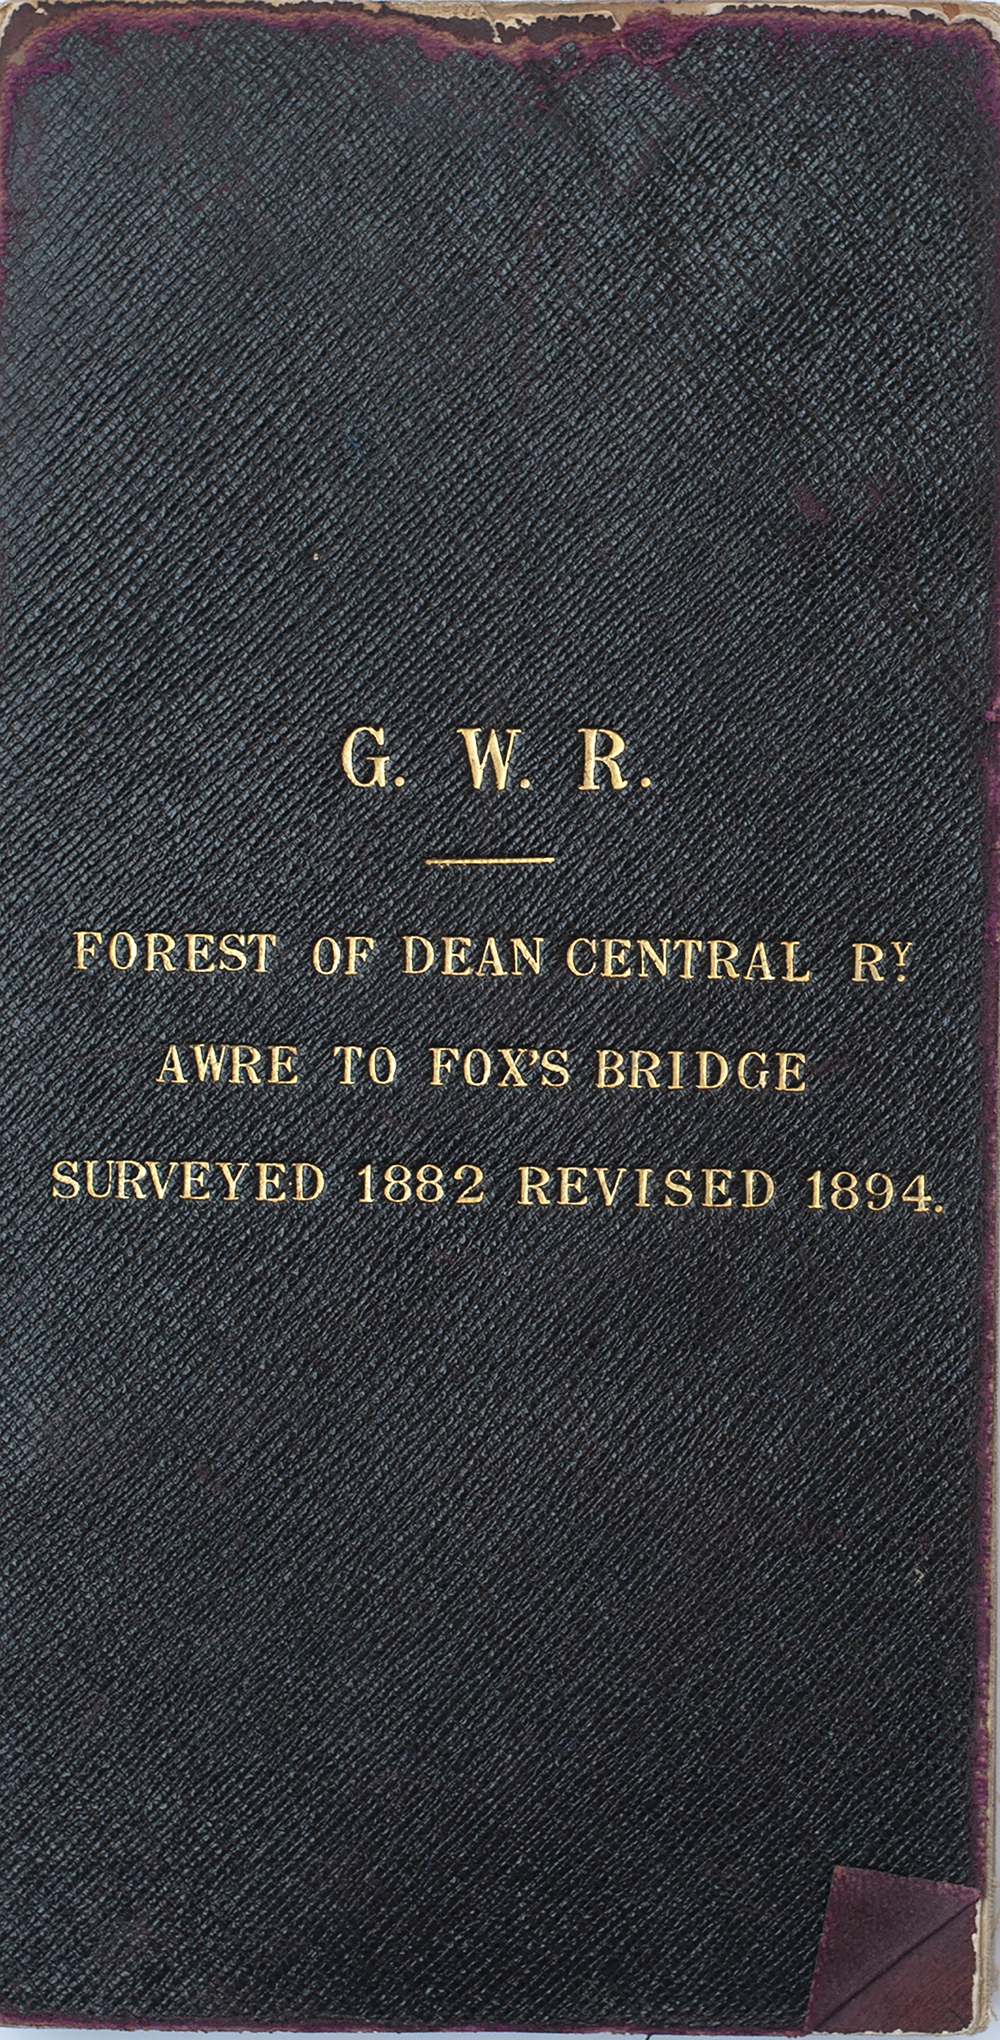 GWR Plans for THE FOREST OF DEAN CENTRAL RAILWAY AWRE TO FOX'S BRIDGE SURVEYED 1882 REVISED 1894.